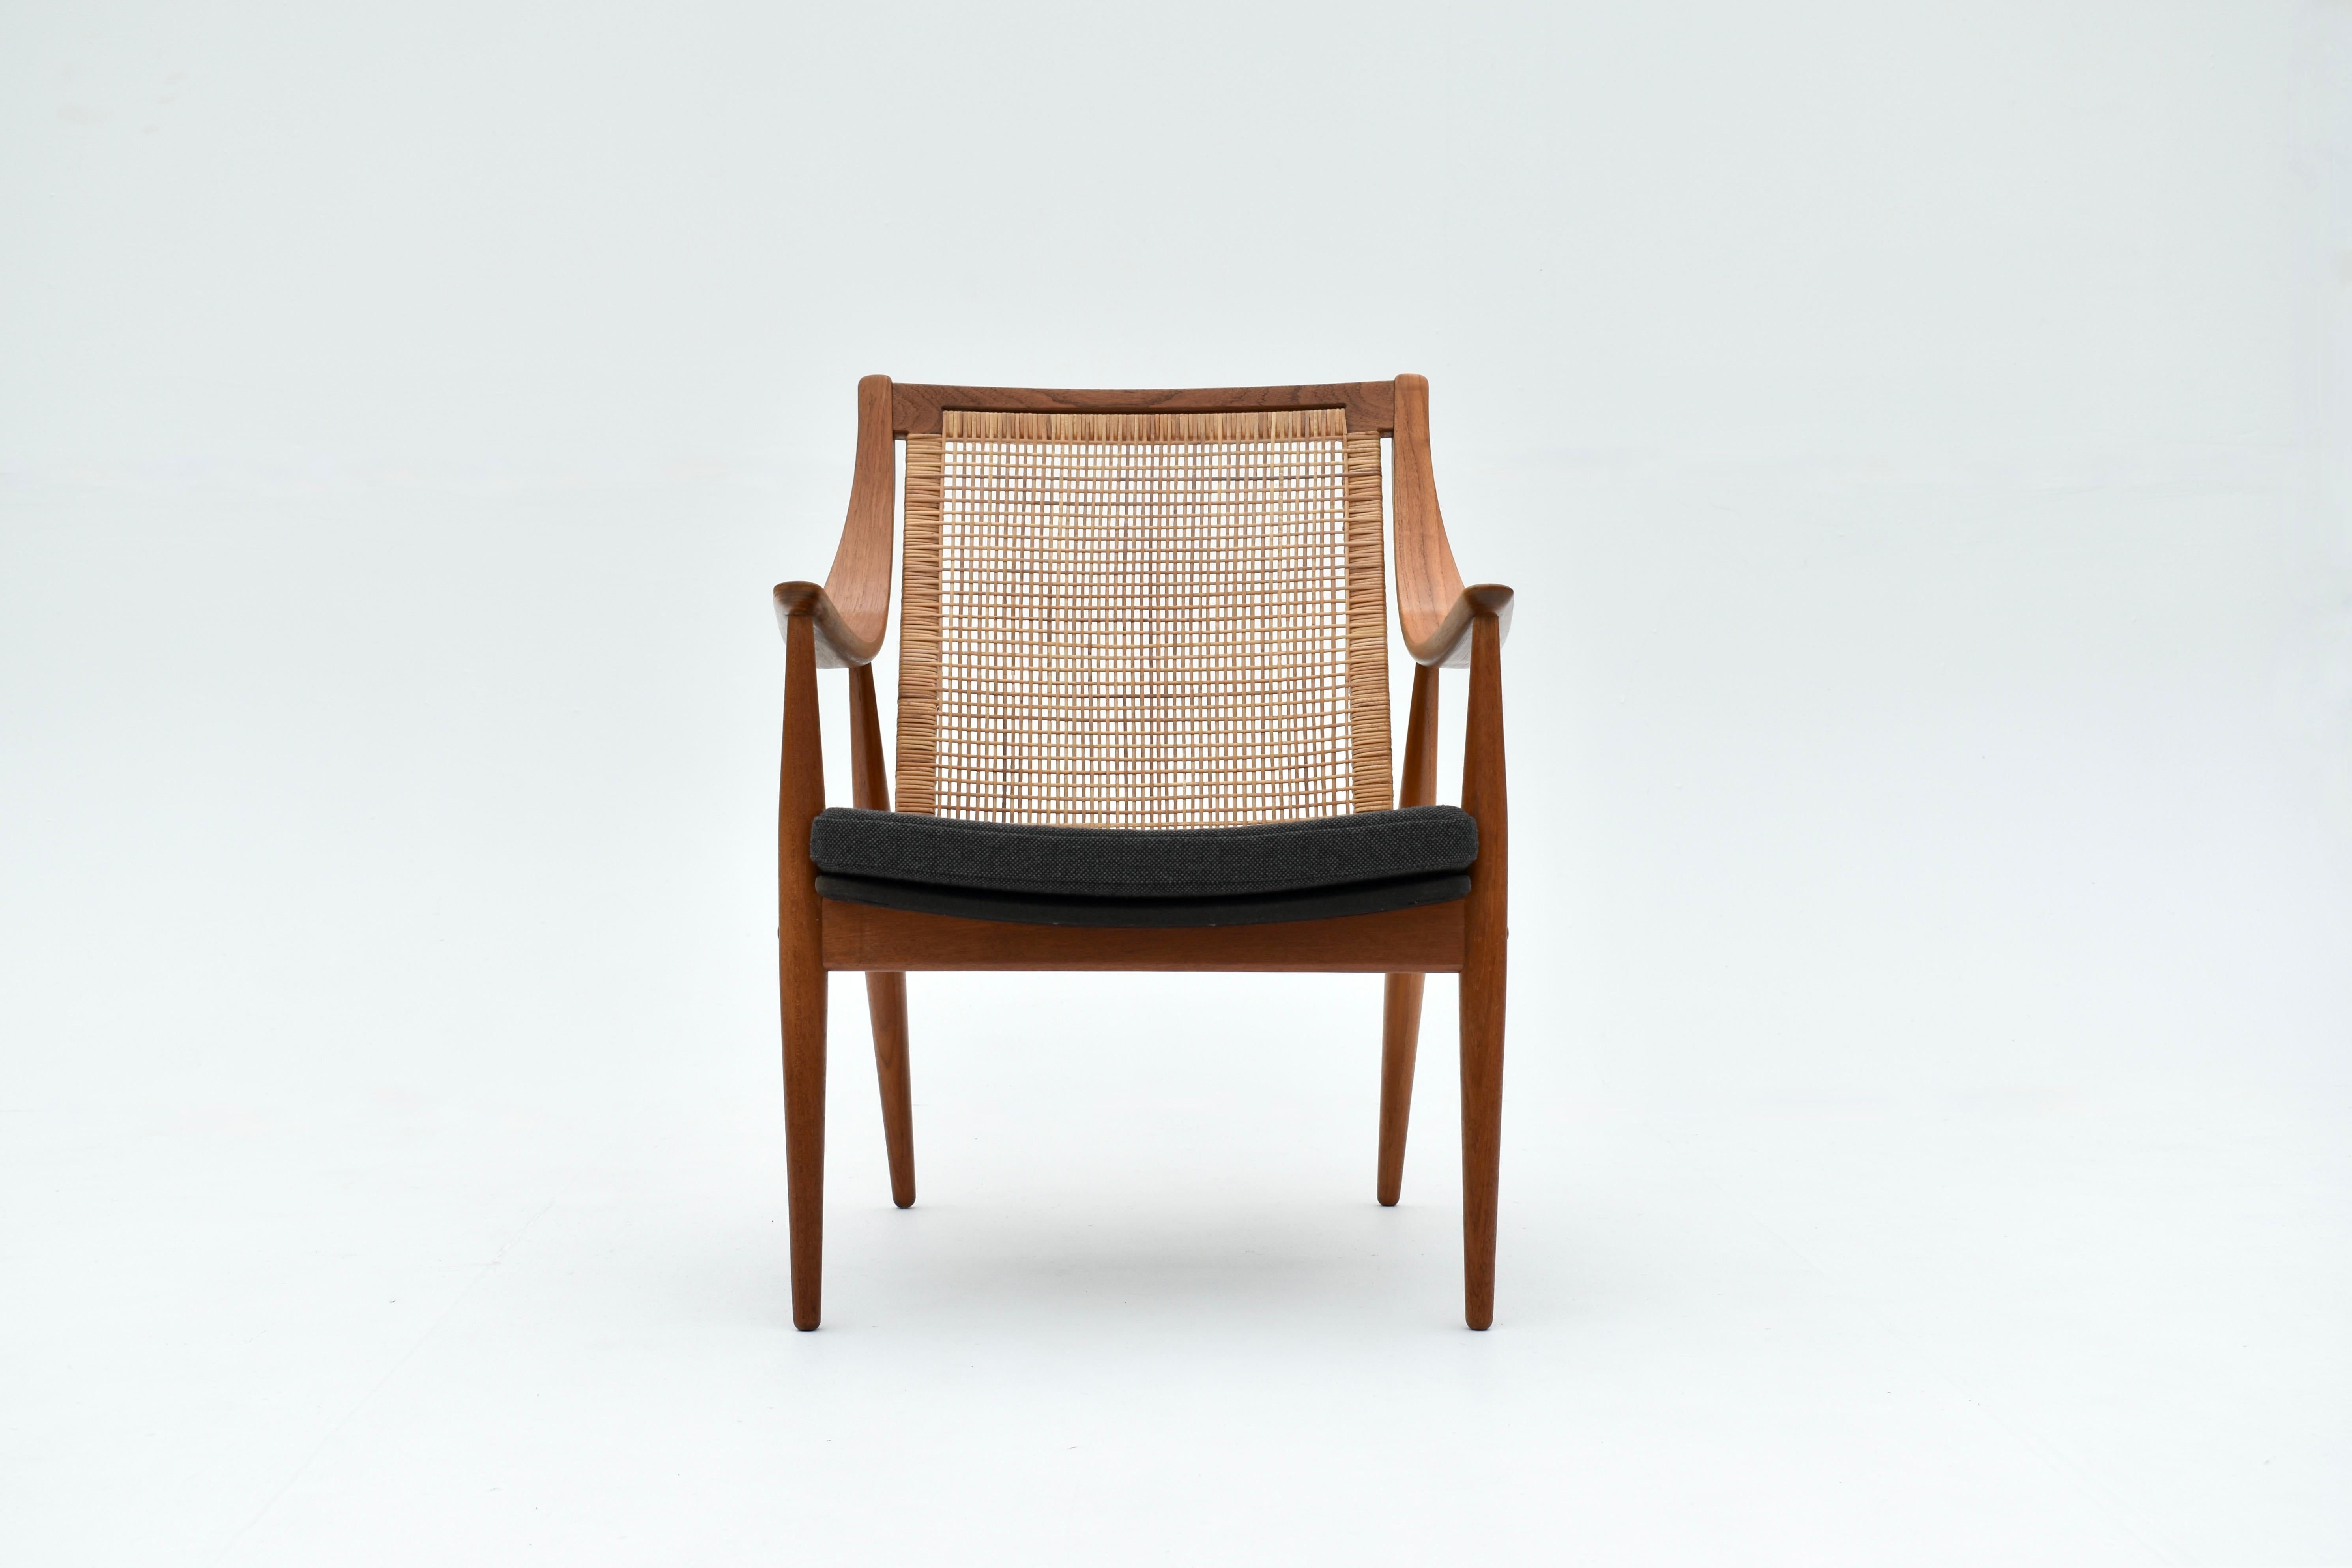 One of our all time favourite designs, the model 147 chair designed by Peter Hvidt & Orla Molgaard Nielsen is one of the most graceful Danish Modern chairs. A combination of very expressive fluid lines to the frame coupled with the rattan backrest